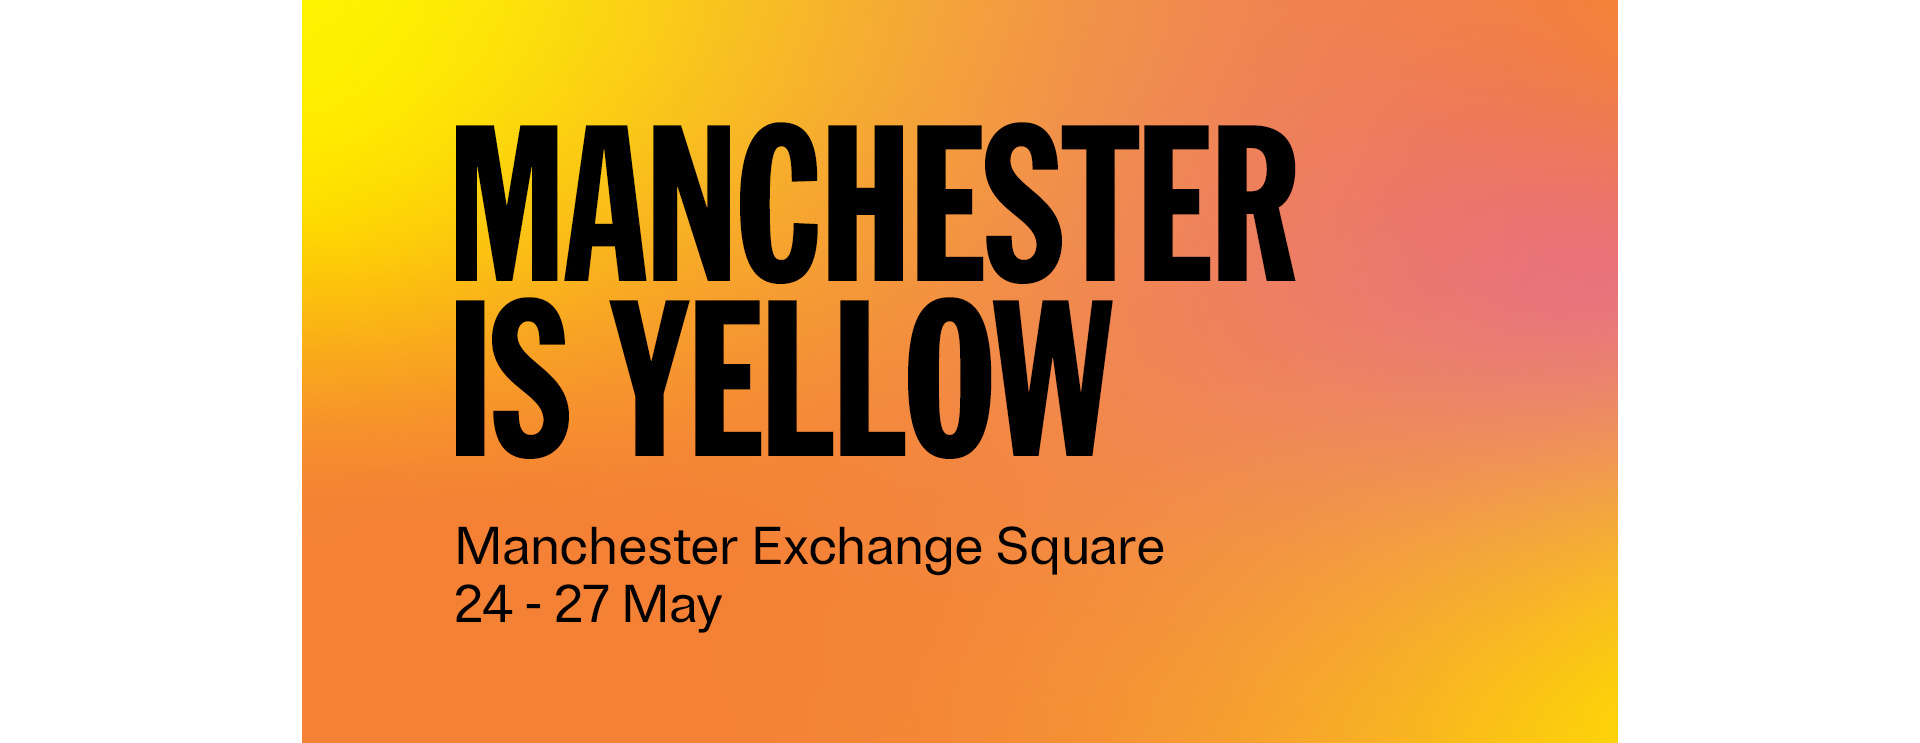 Manchester is yellow